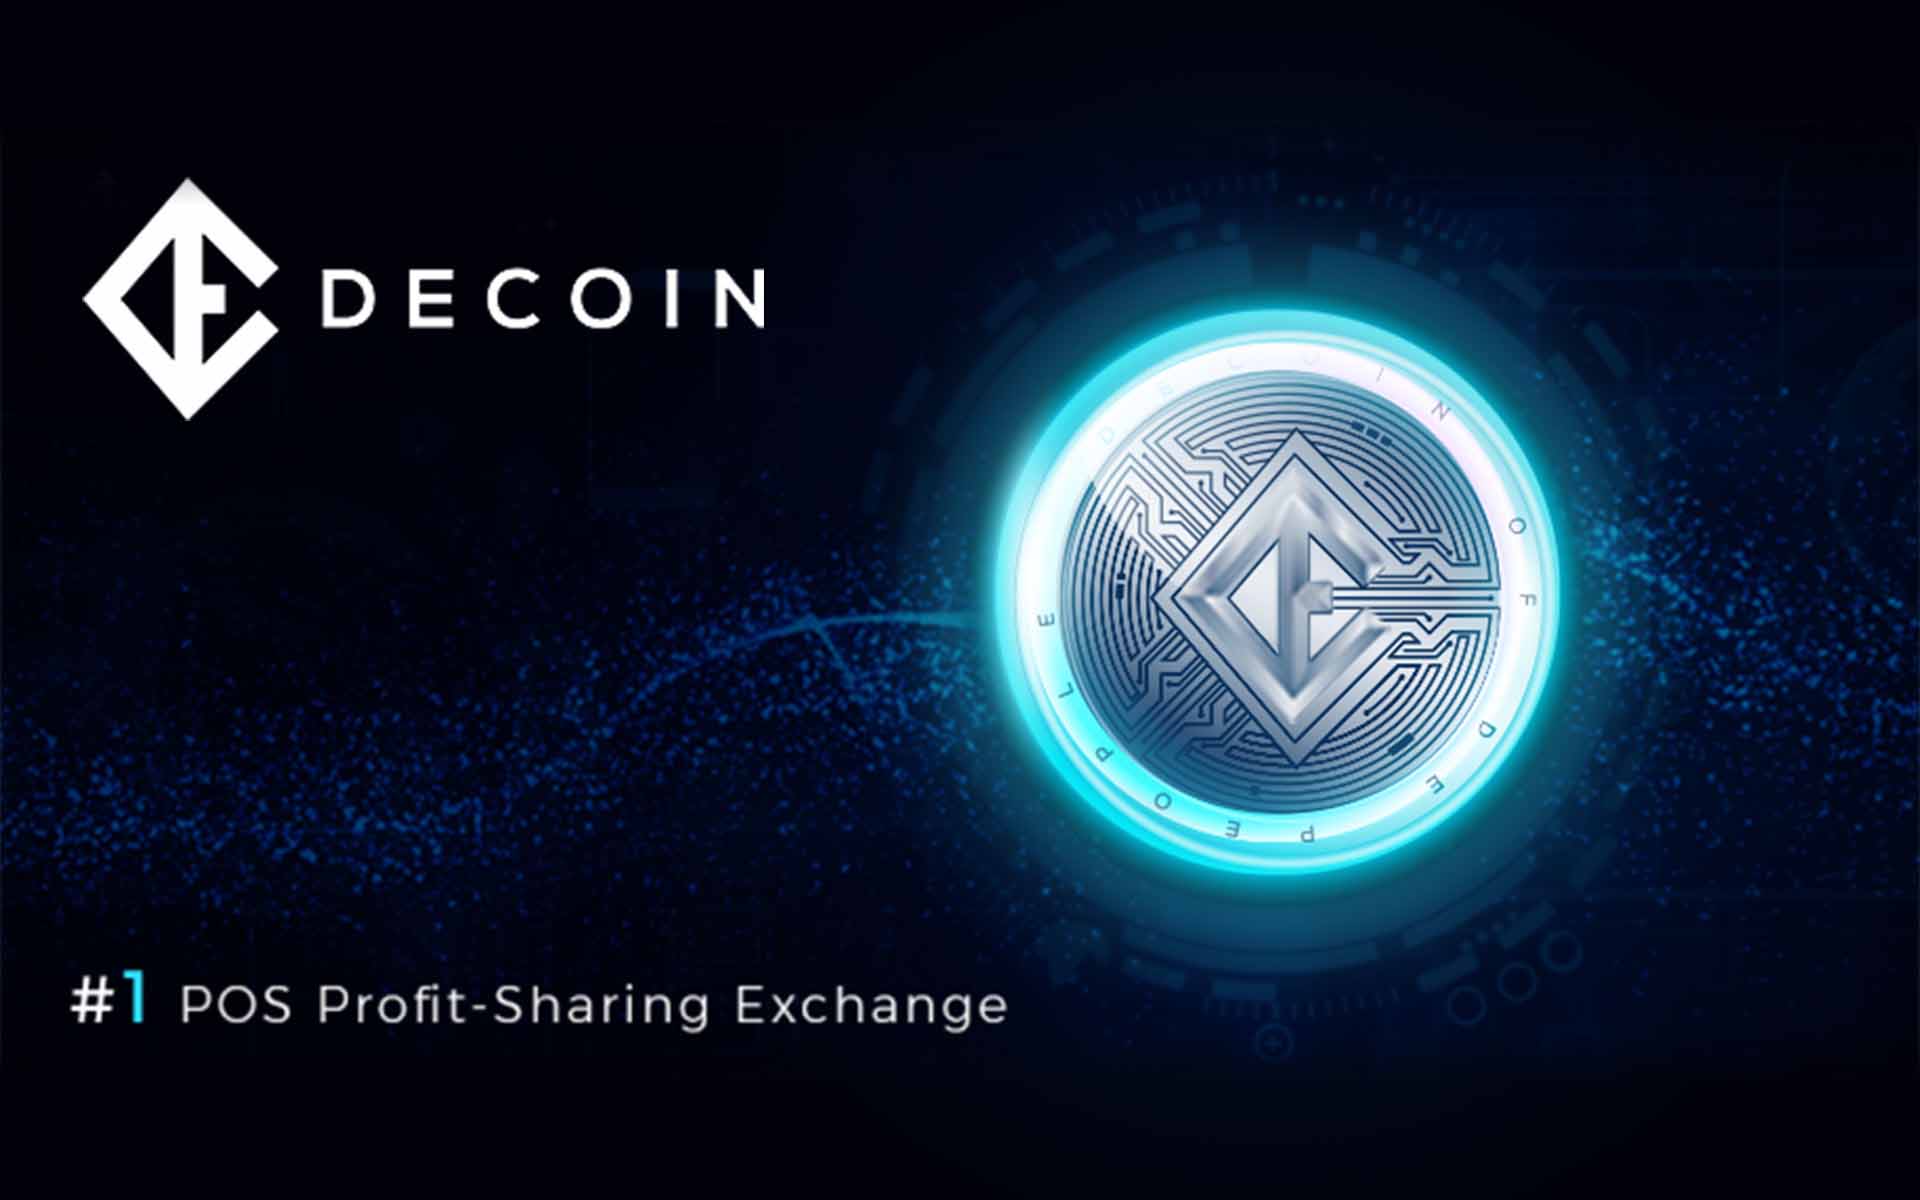 Decoin: What Makes It the Next Big Thing?